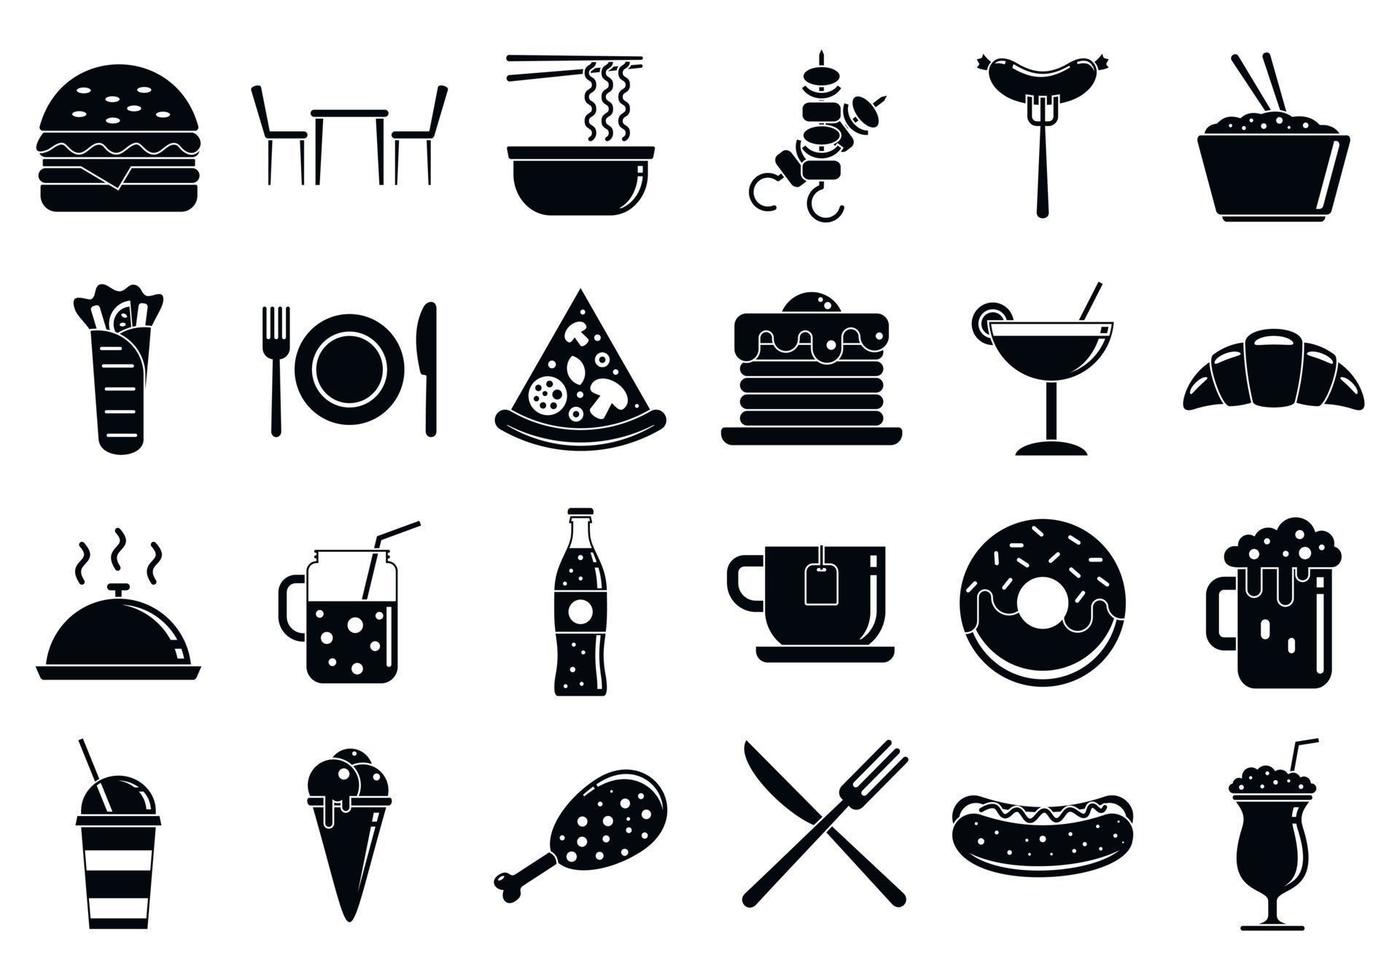 Food courts icons set, simple style vector